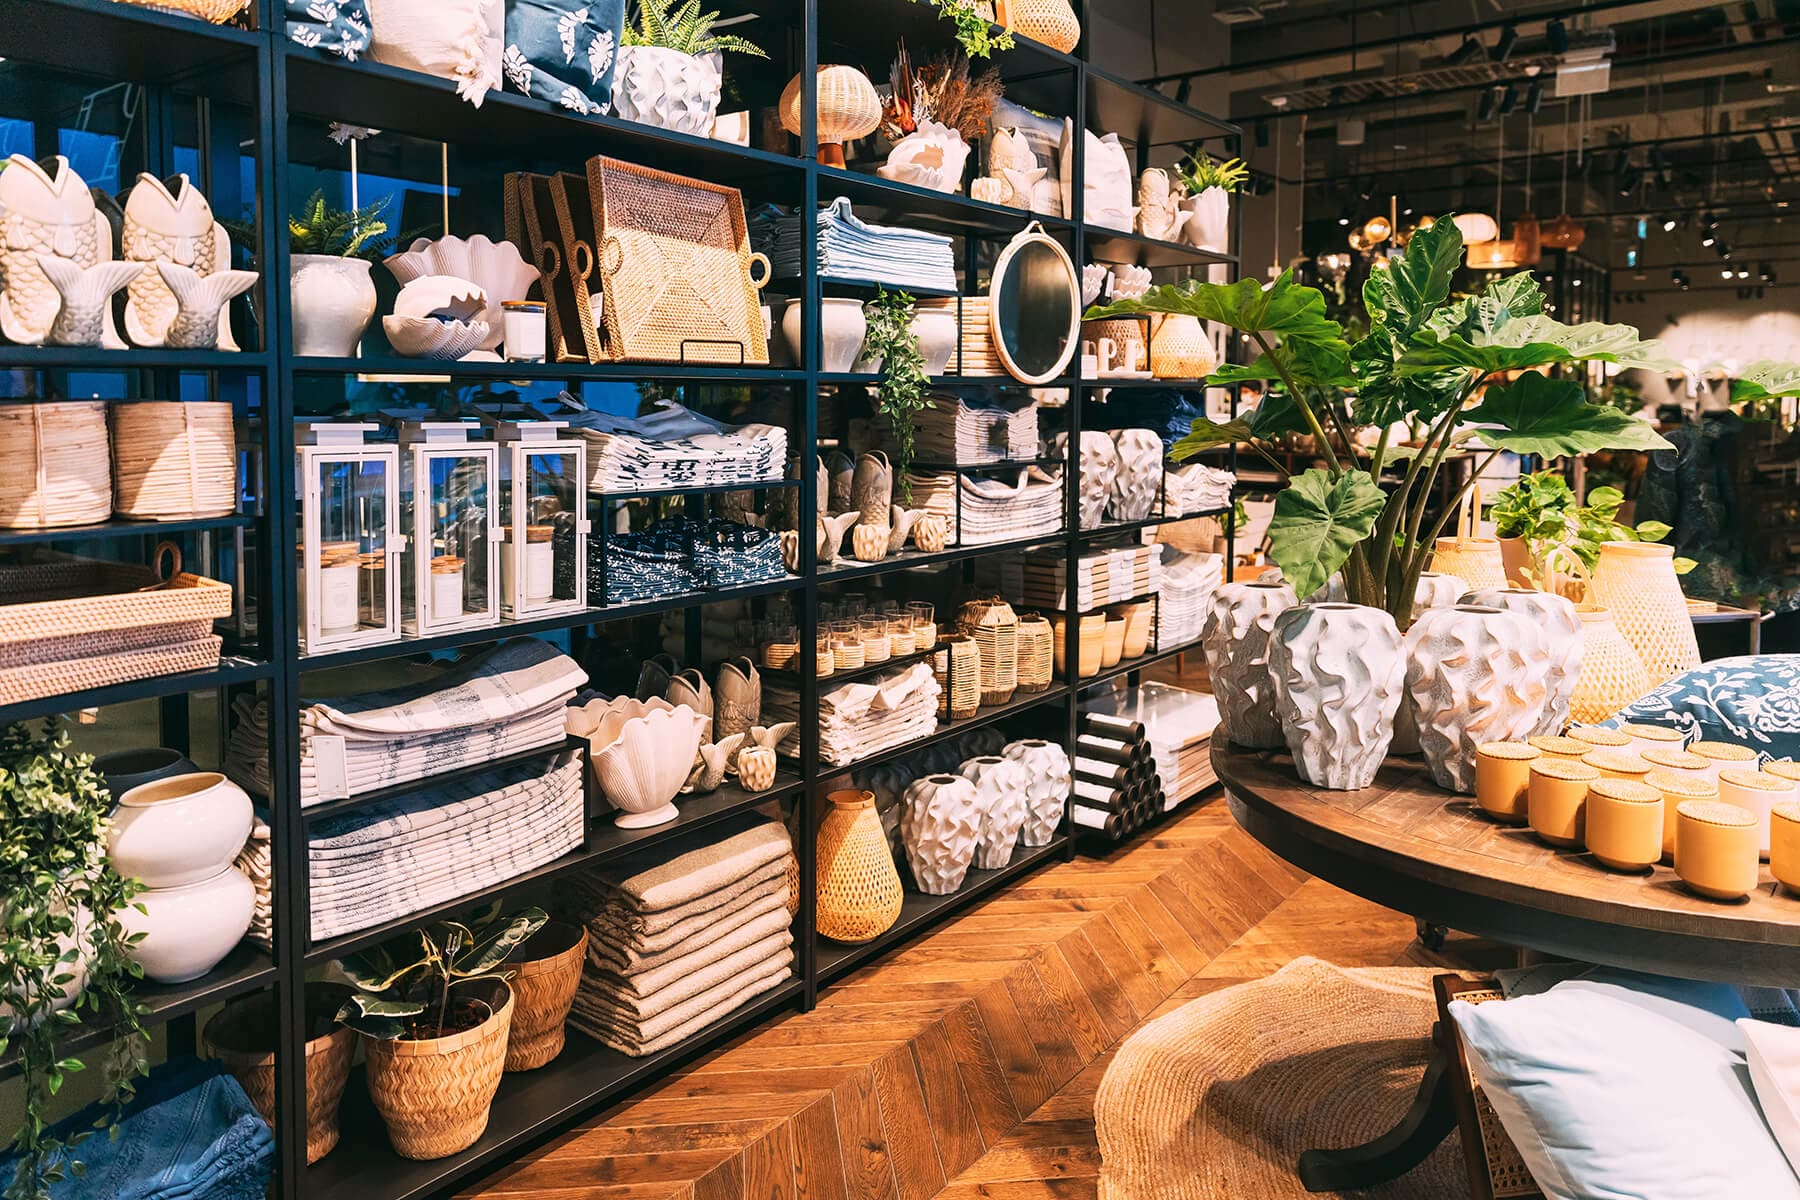 At Sunway Pyramid, there is an extensive selection of home decor shops to choose from, each with its own speciality. Fret not about breaking your bank as there are plenty of affordable options like HOOGA, Kaison, obJet, Homes Harmony and more!